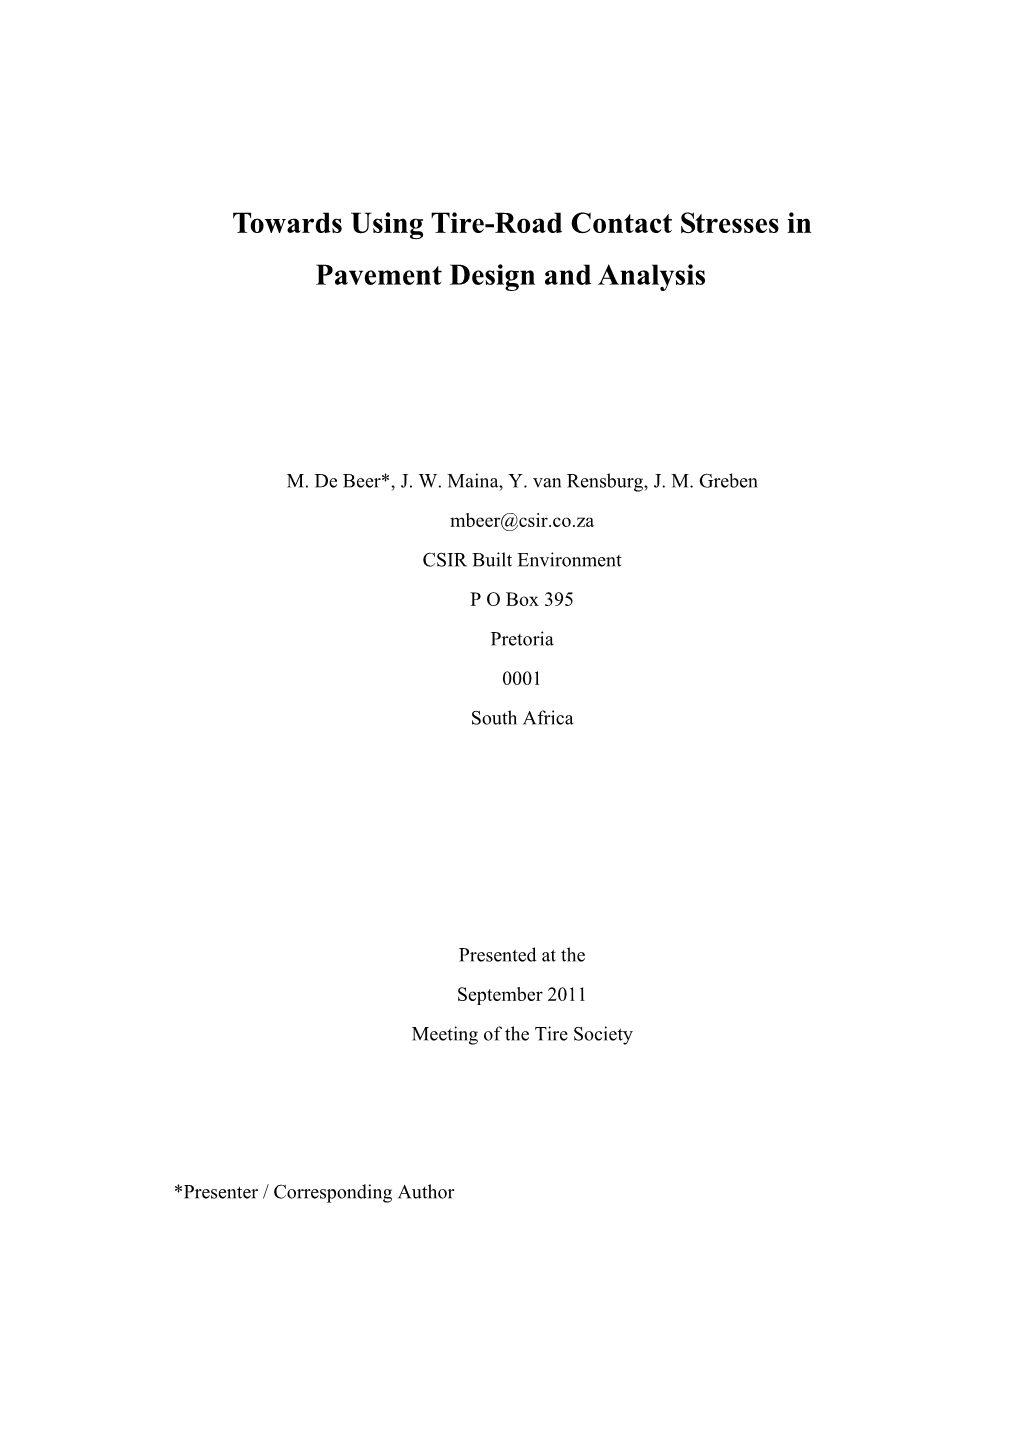 Towards Using Tire-Road Contact Stresses in Pavement Design and Analysis